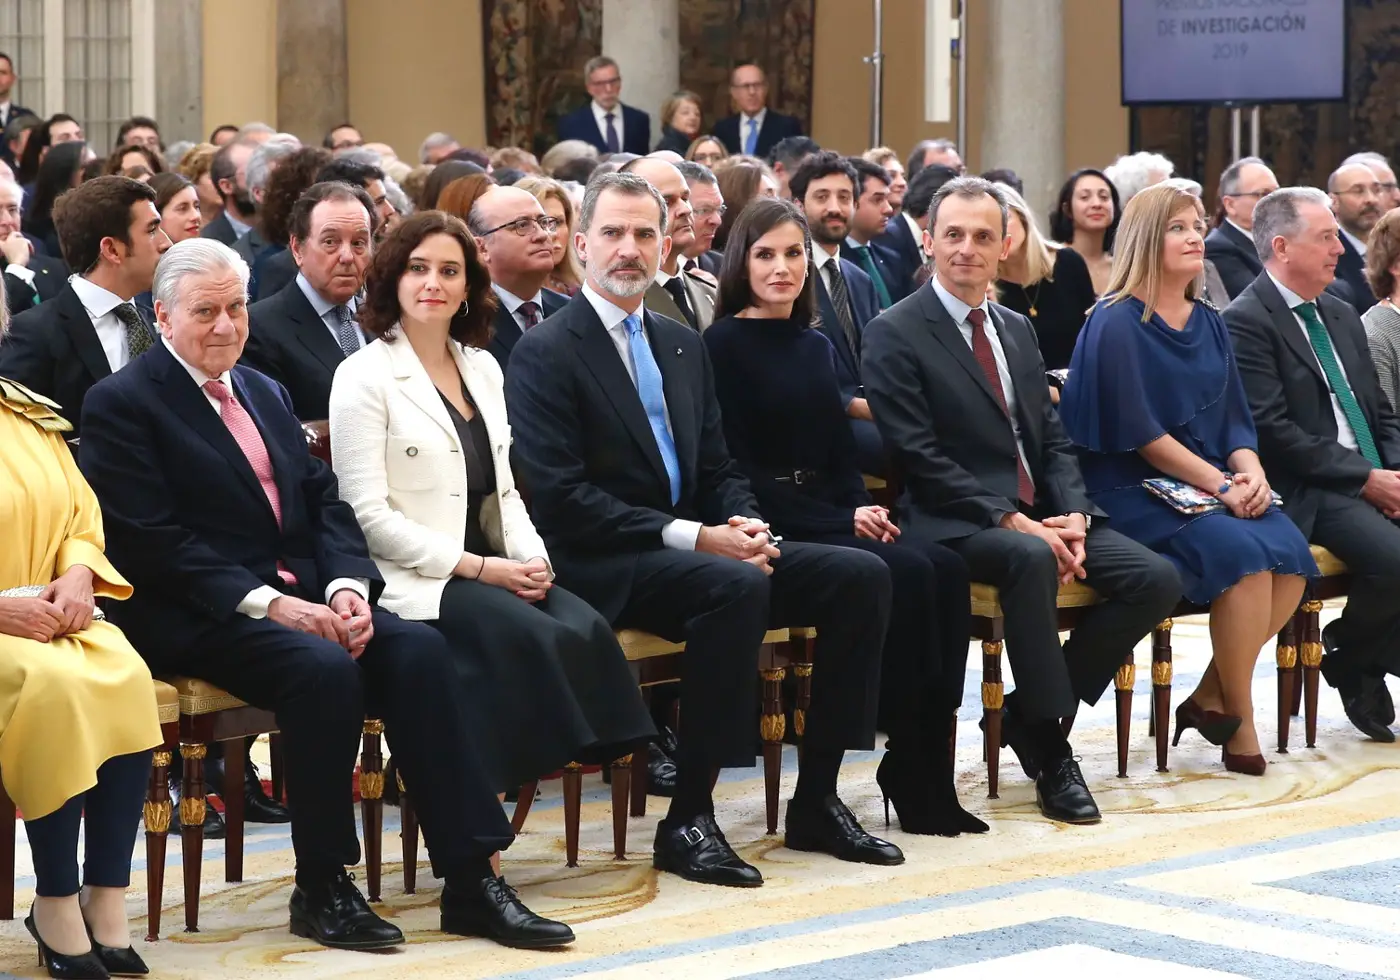 Queen Letizia and King Felipe at the National Research Award